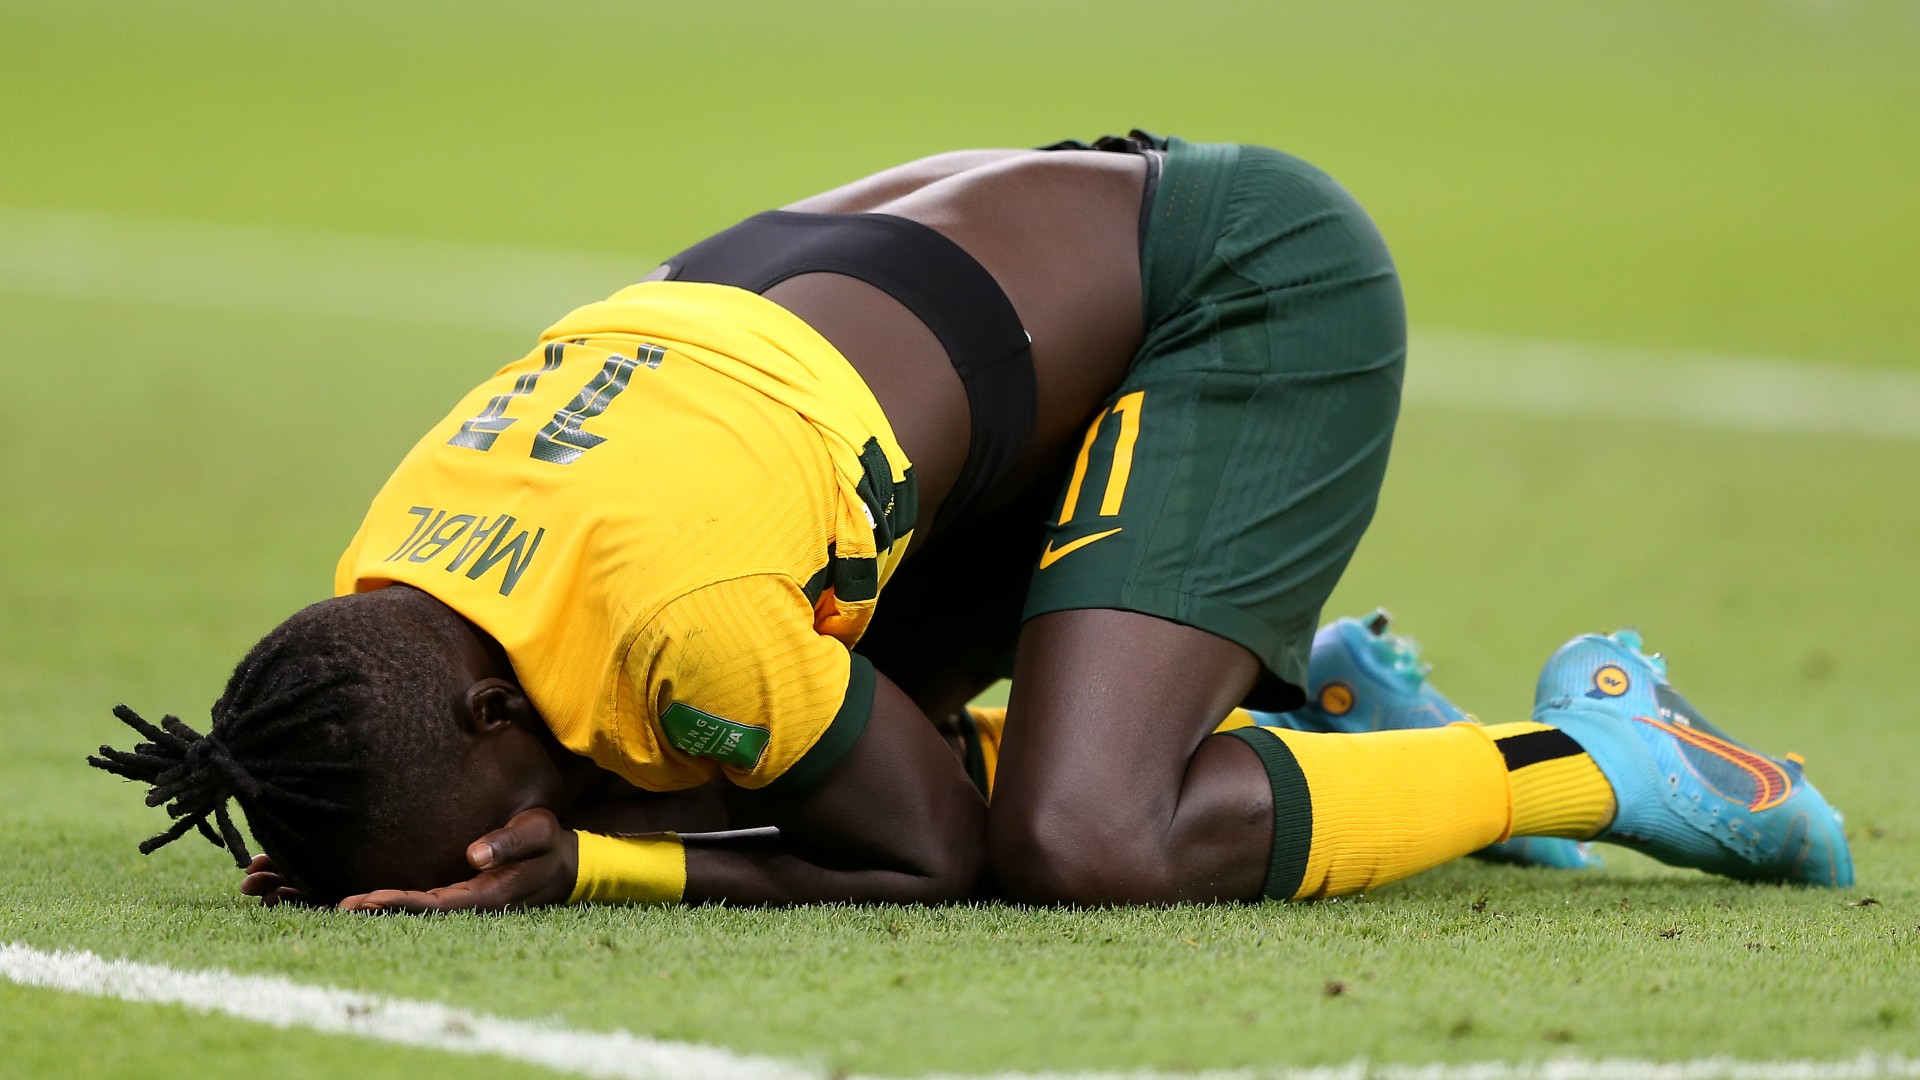 Socceroos Awer Mabil says penalty was a ‘thank you’ to Australia